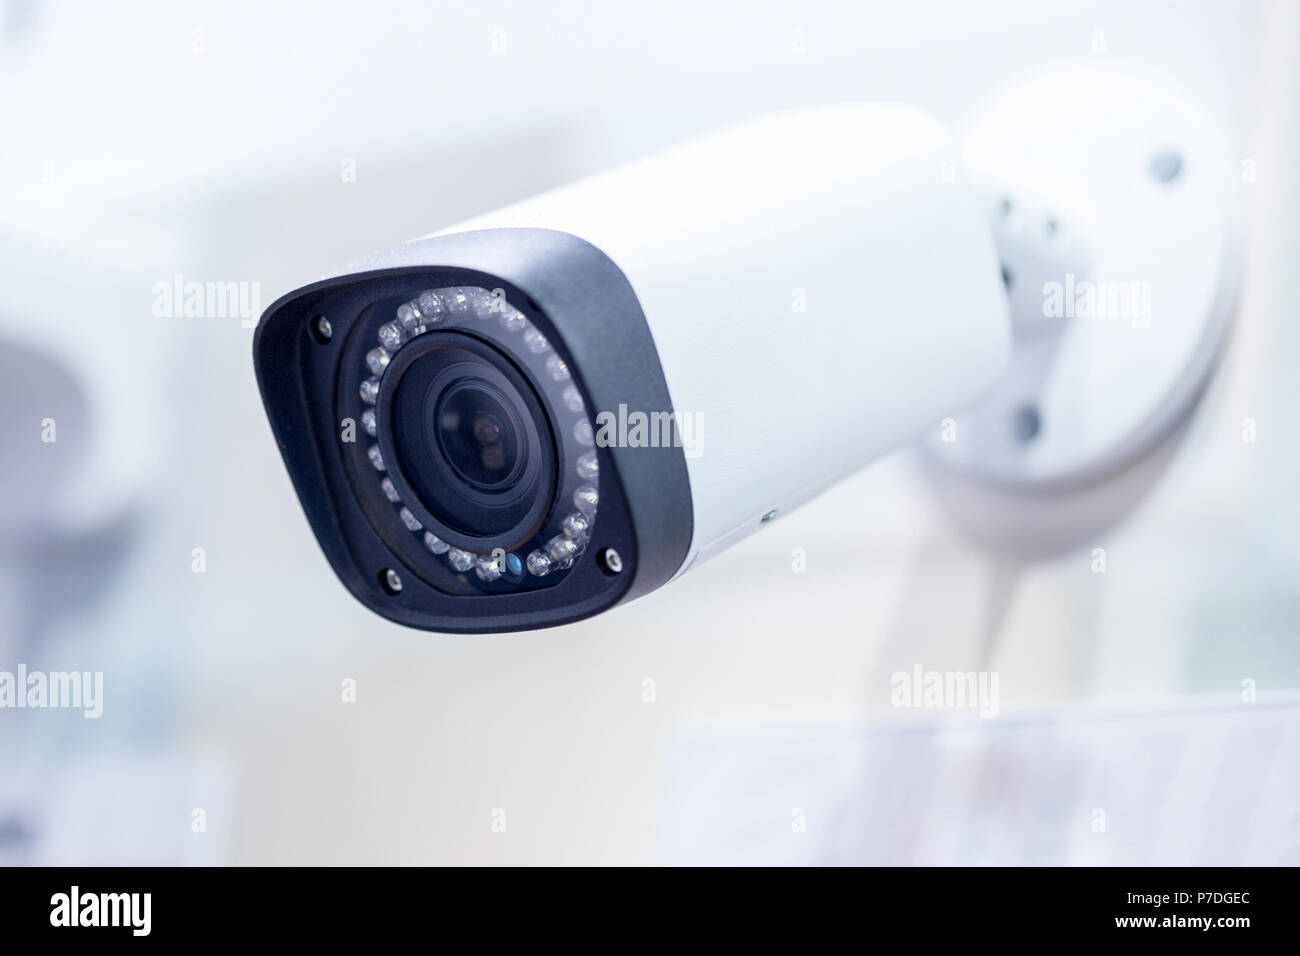 Big white professional surveillance camera. CCTV mounted on ceiling. LED IR lights around lens. Security system concept. Copyspace, neutral light blue Stock Photo